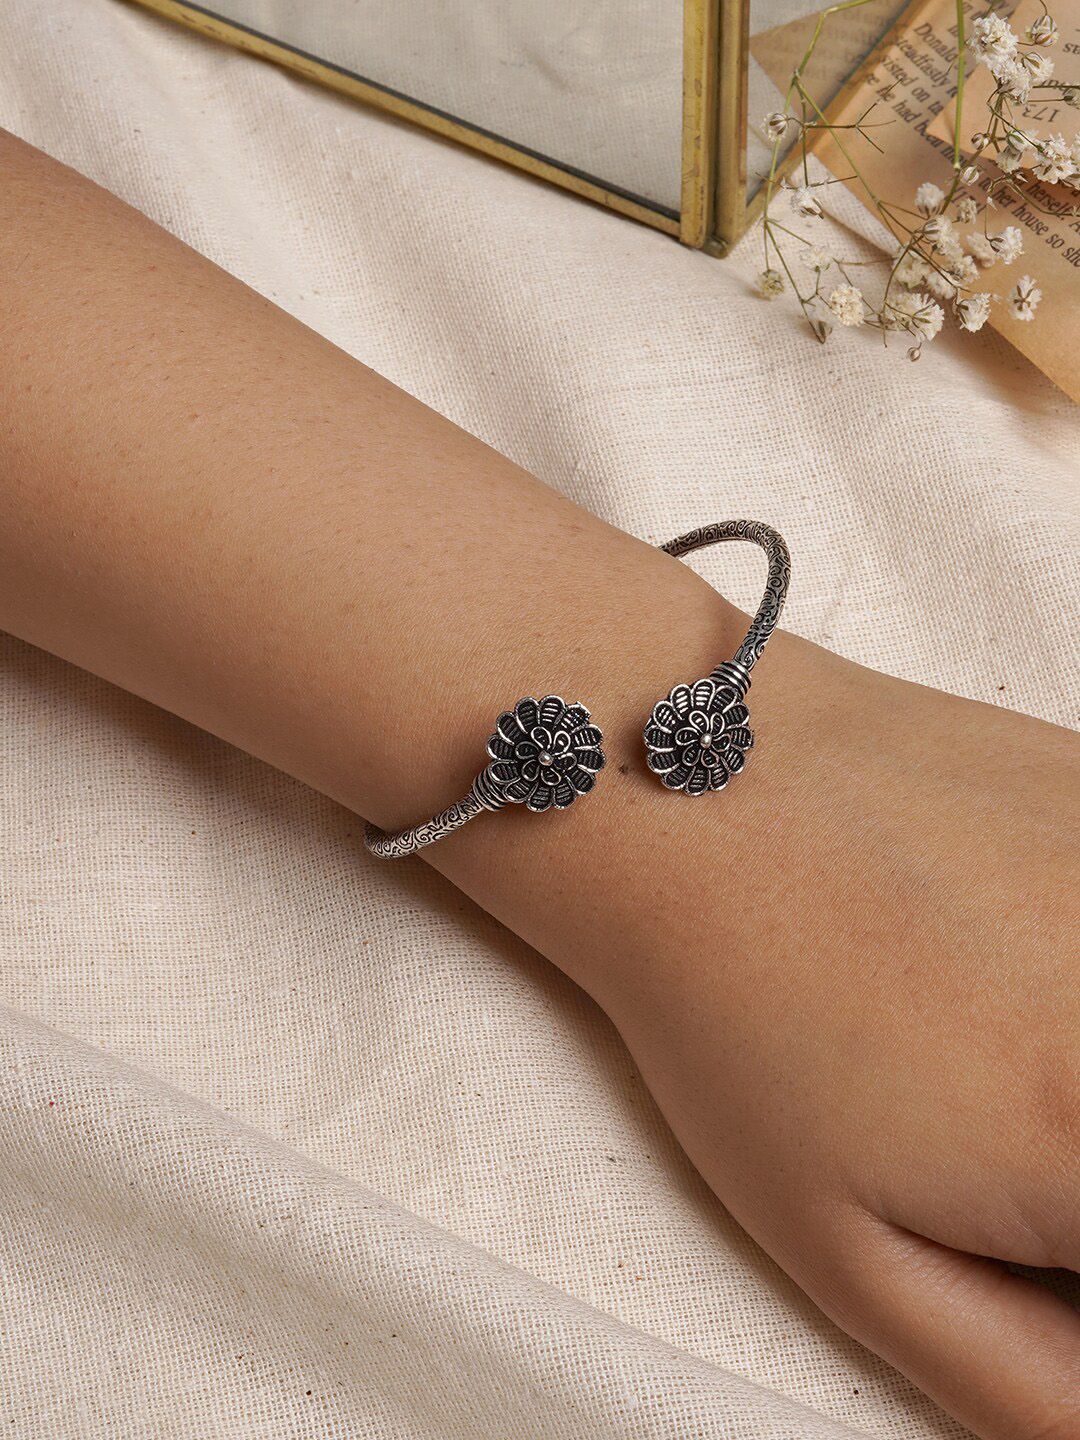 TEEJH Women Silver-Toned Oxidised Silver-Plated Bangle-Style Bracelet Price in India